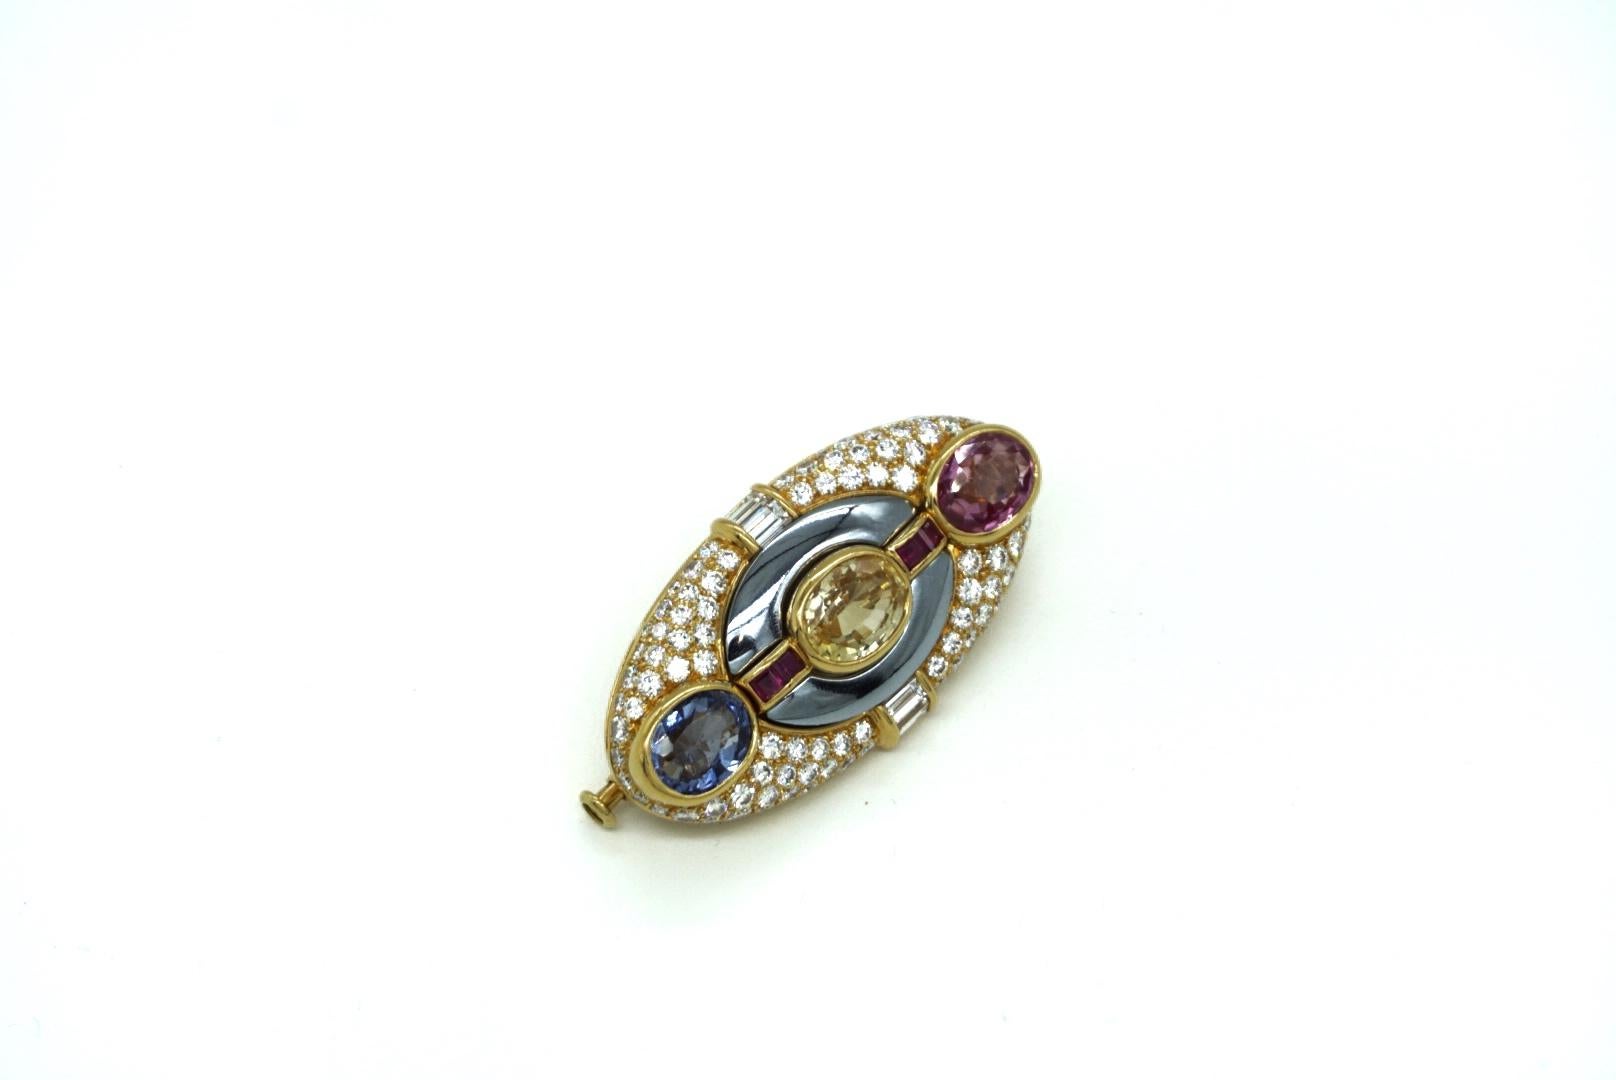 A rare Bulgari brooch of geometrical design, with diamonds, hematite, a blue sapphire (3.22 cts), a yellow sapphire (3.57 cts), and a pink sapphire (3.03 cts) mounted on 18k gold. Made in Italy, circa 1980.